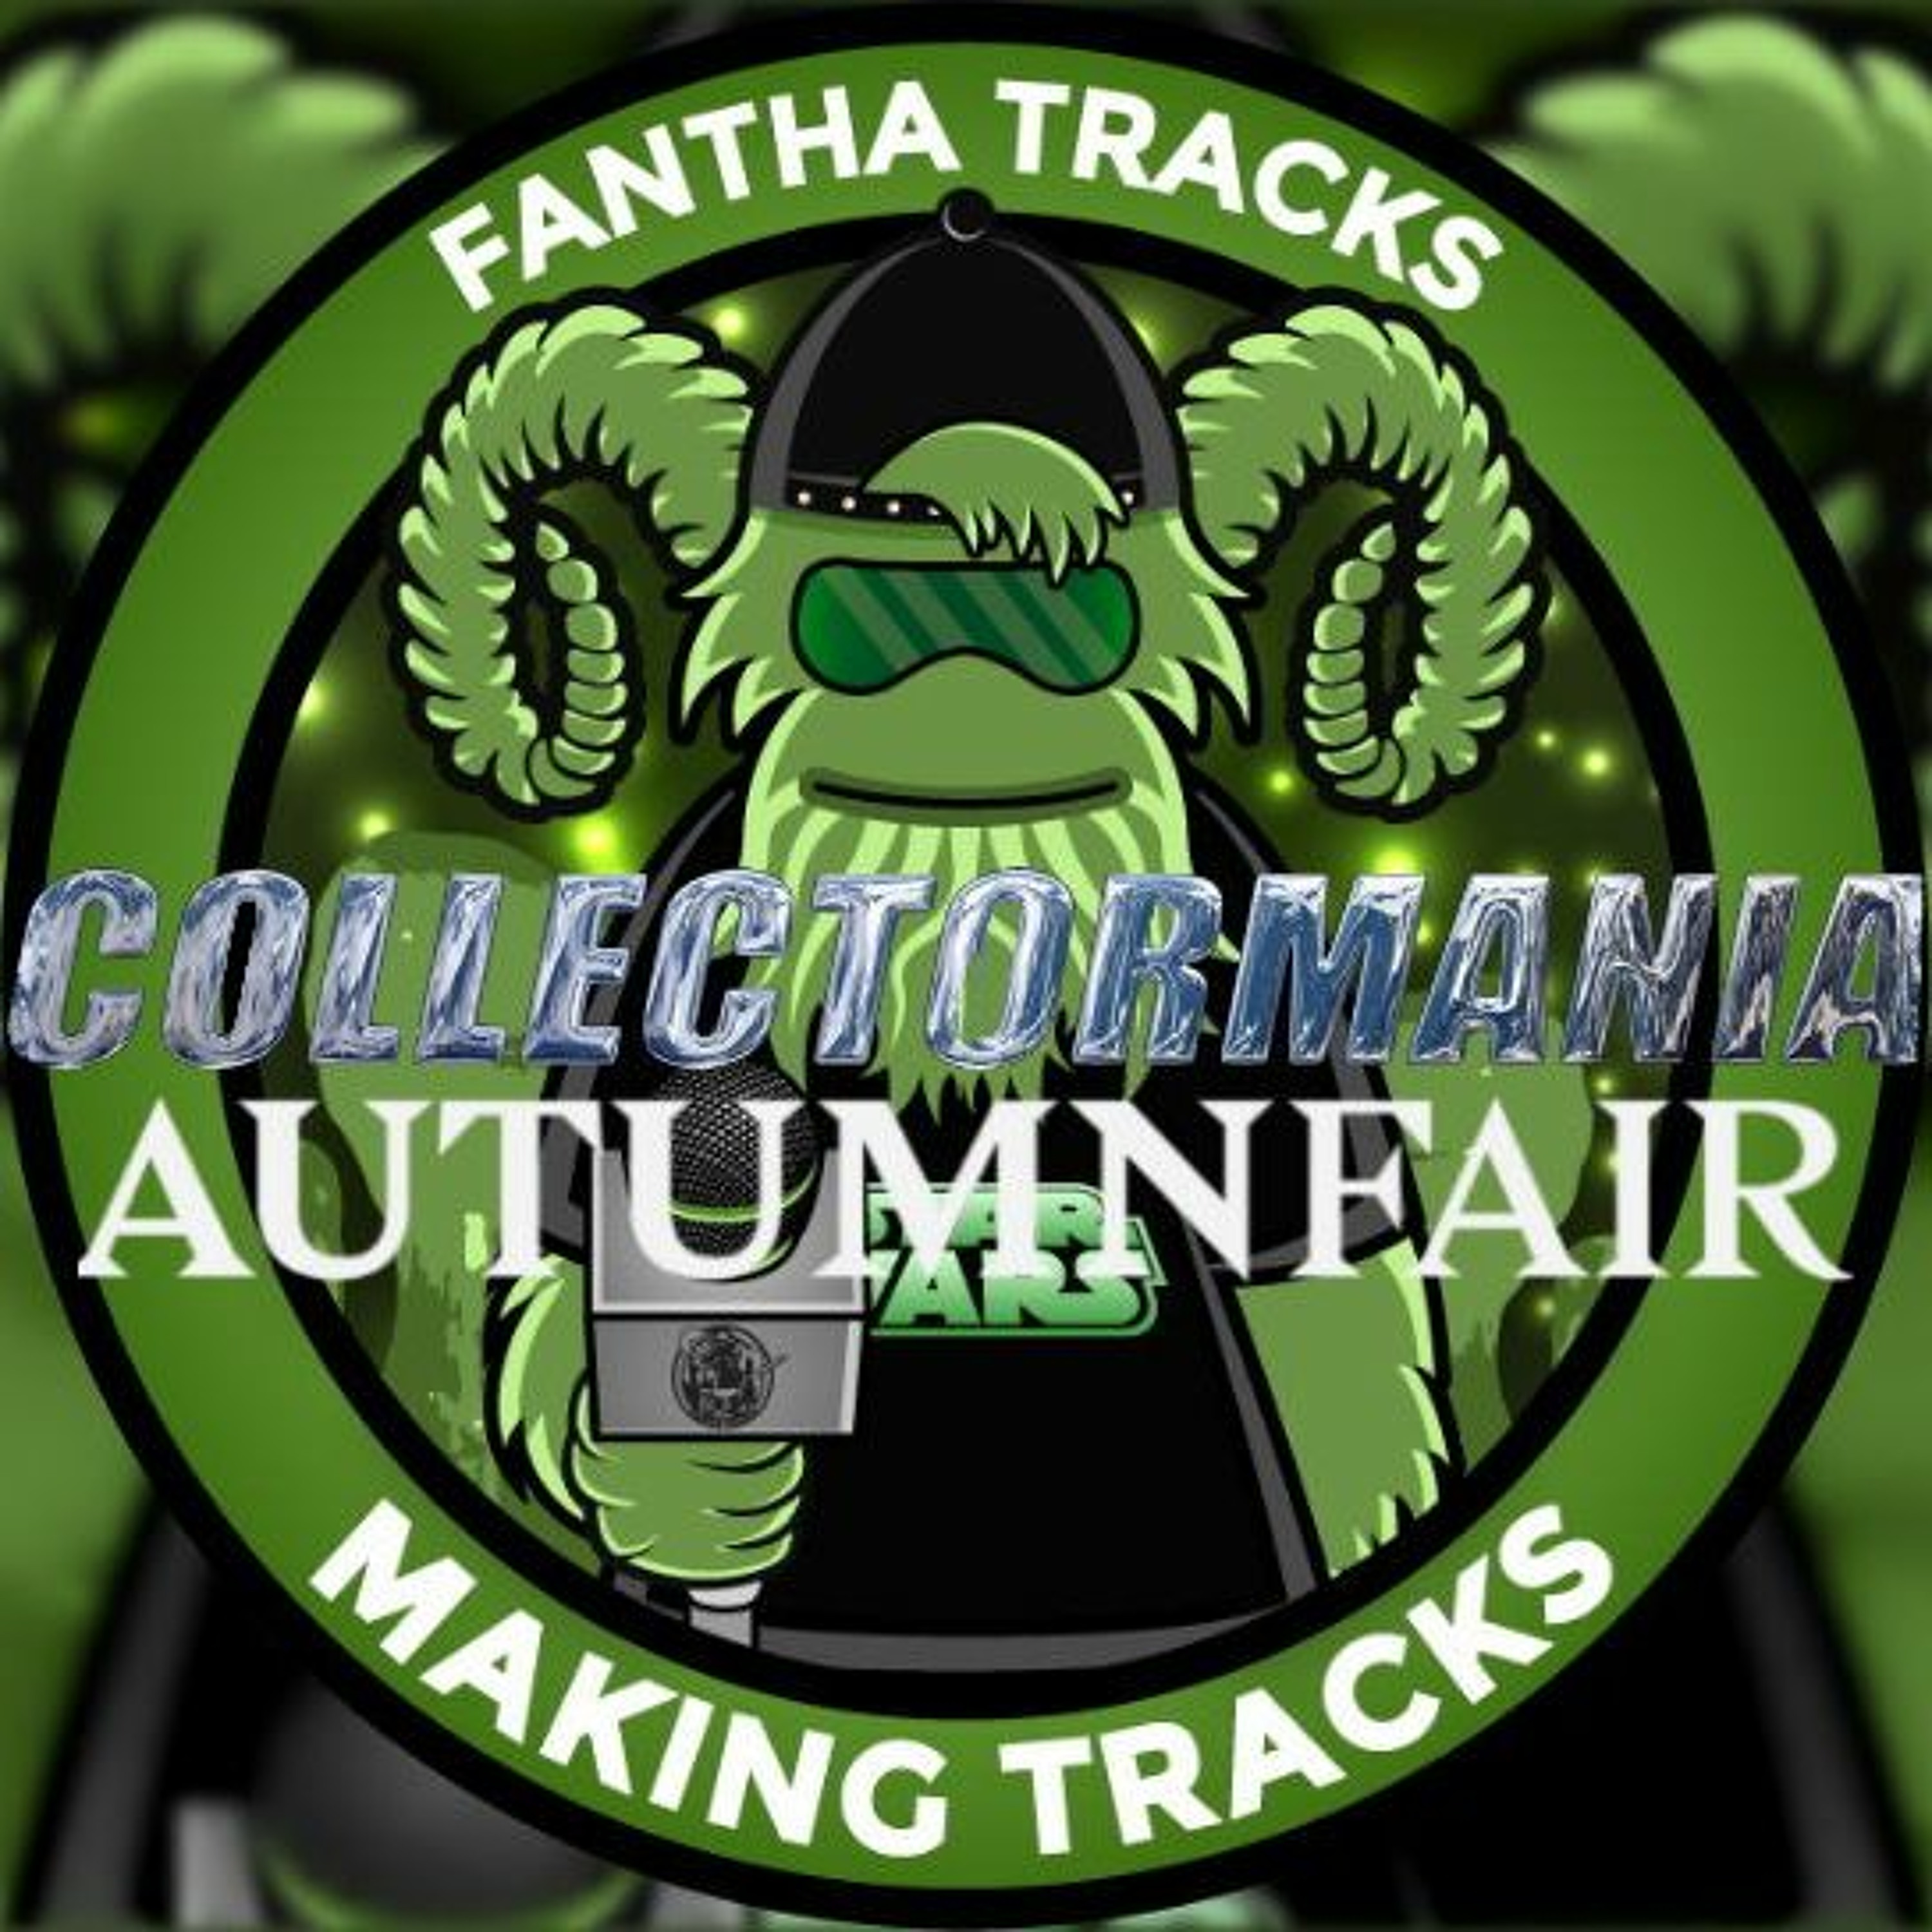 Making Tracks at Collectormania 27: With guest Dave Barclay